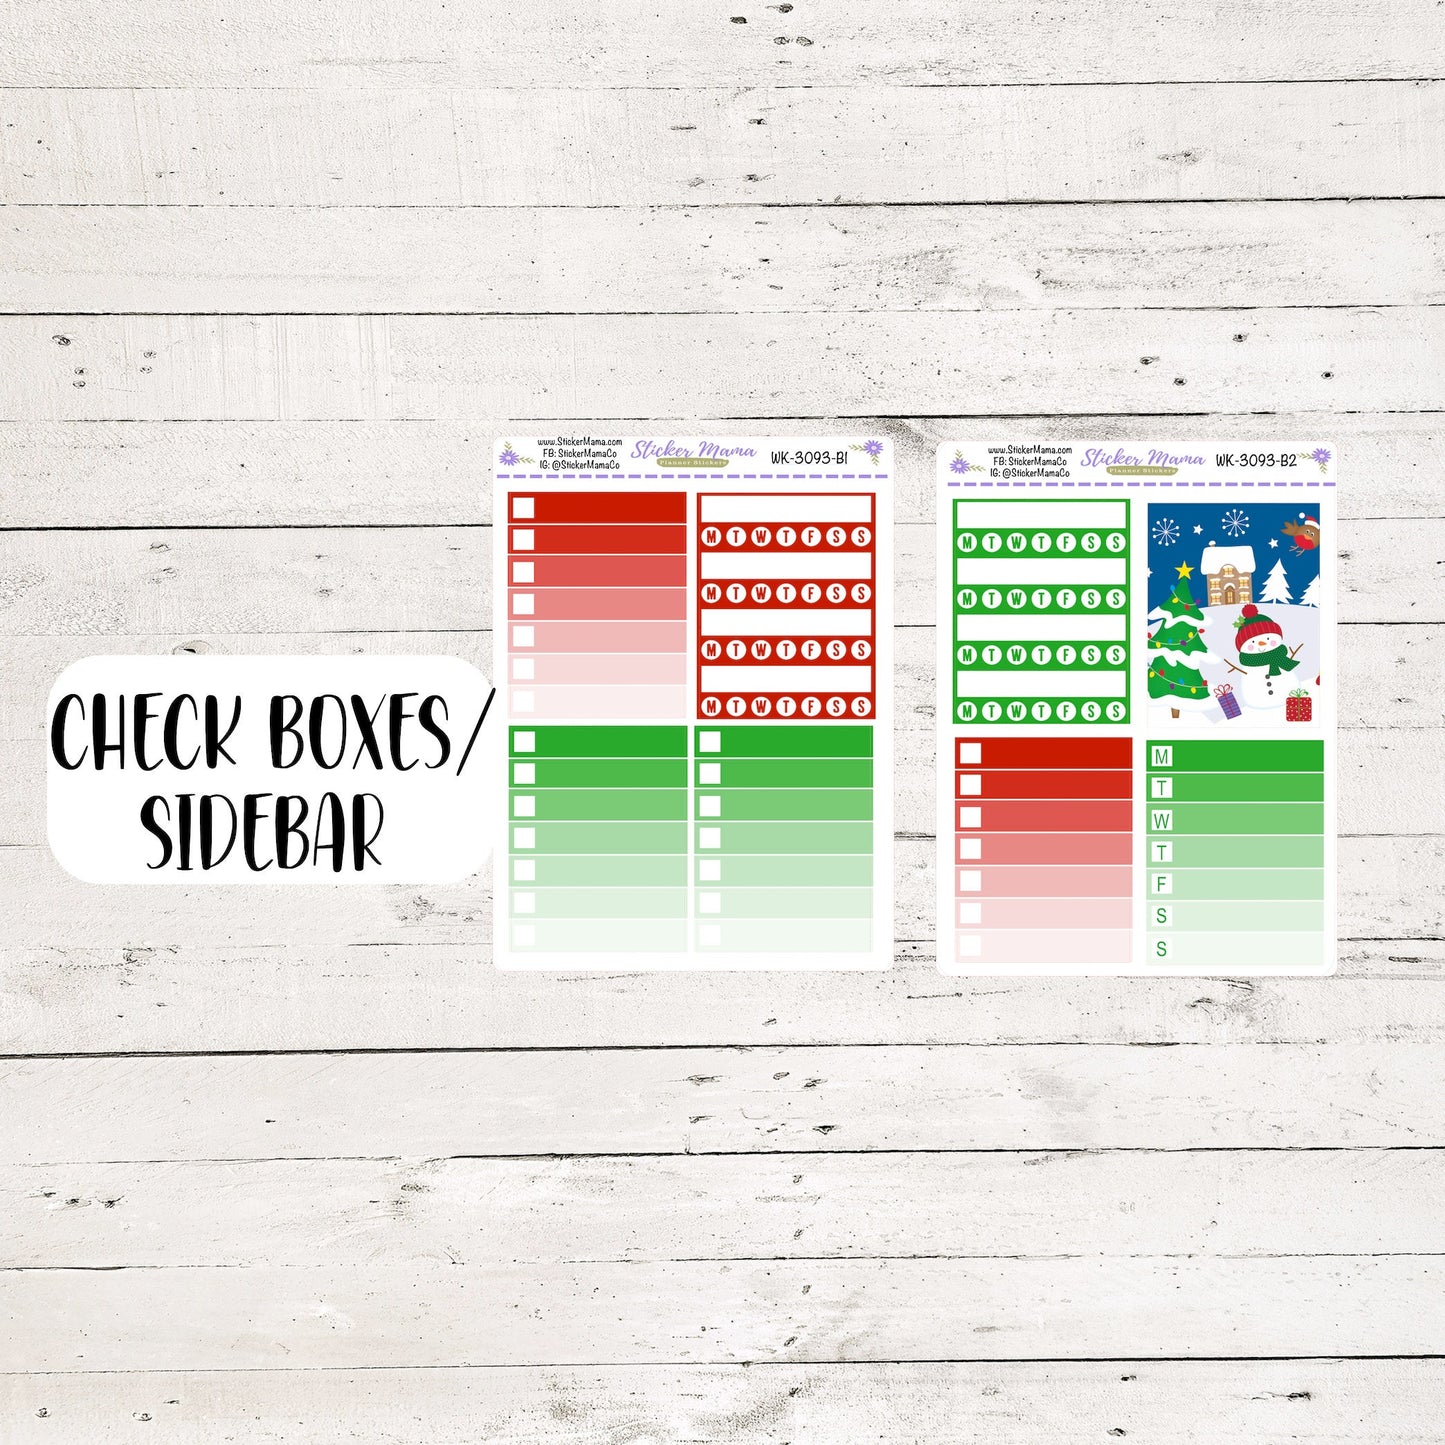 NEW WK-3093 - Holly Jolly || Weekly Planner Kit || Erin Condren || Hourly Planner Kit || Vertical Planner Kit